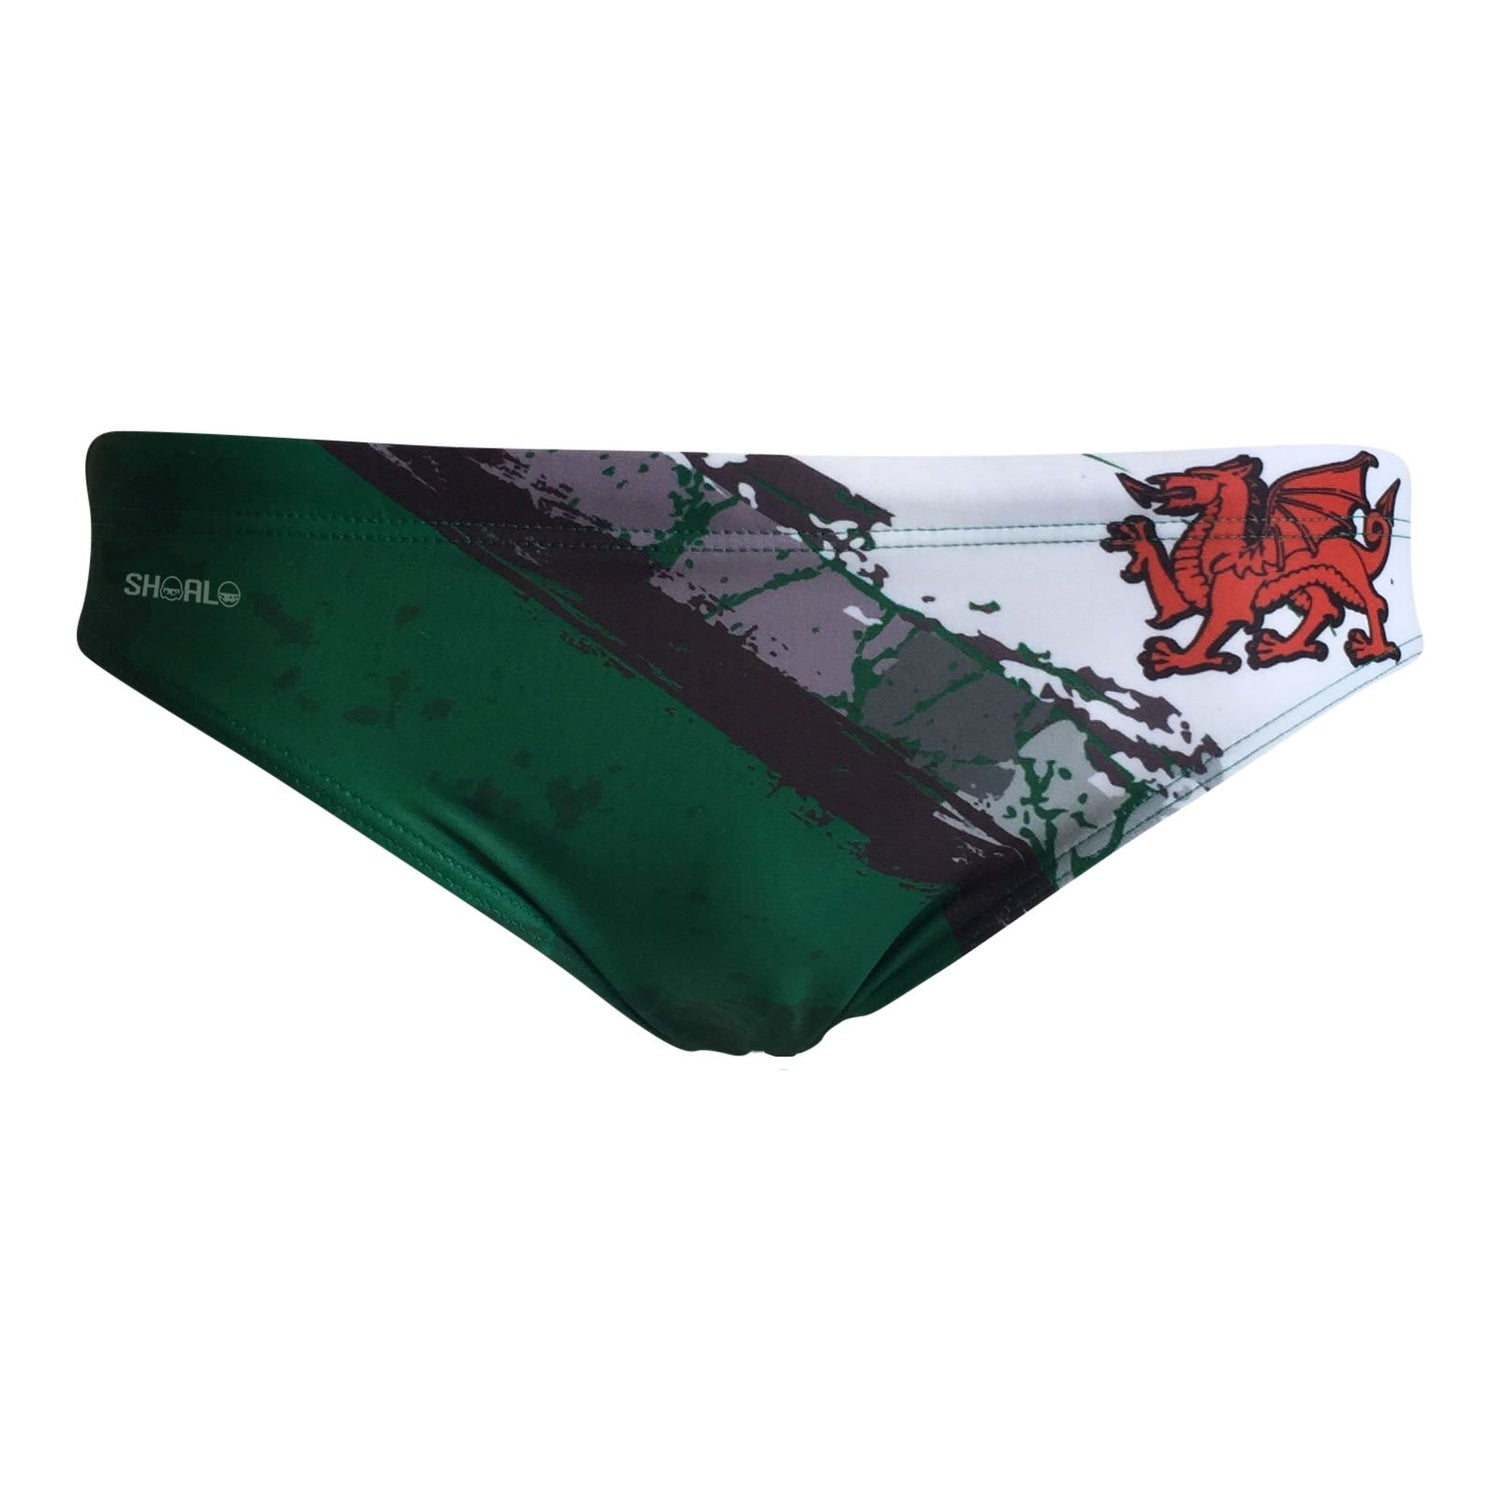 SHOALO Wales - Mens Suit - Water Polo - front